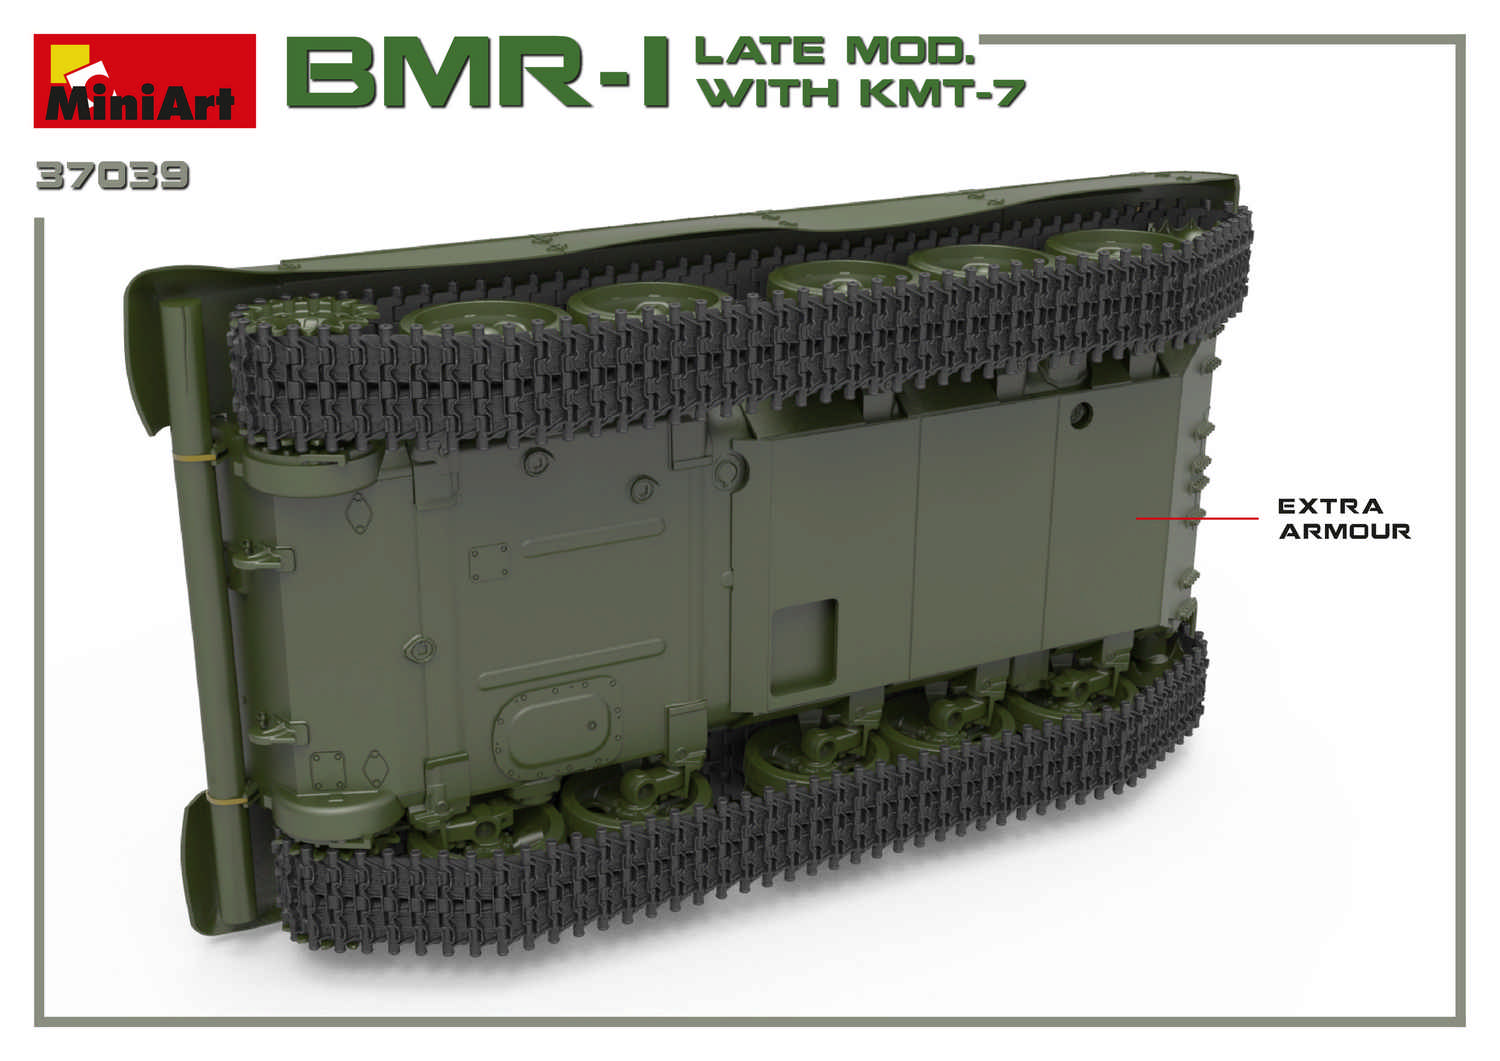 1/35 BMR-1 LATE MOD. WITH KMT-7 MiniArt 37039